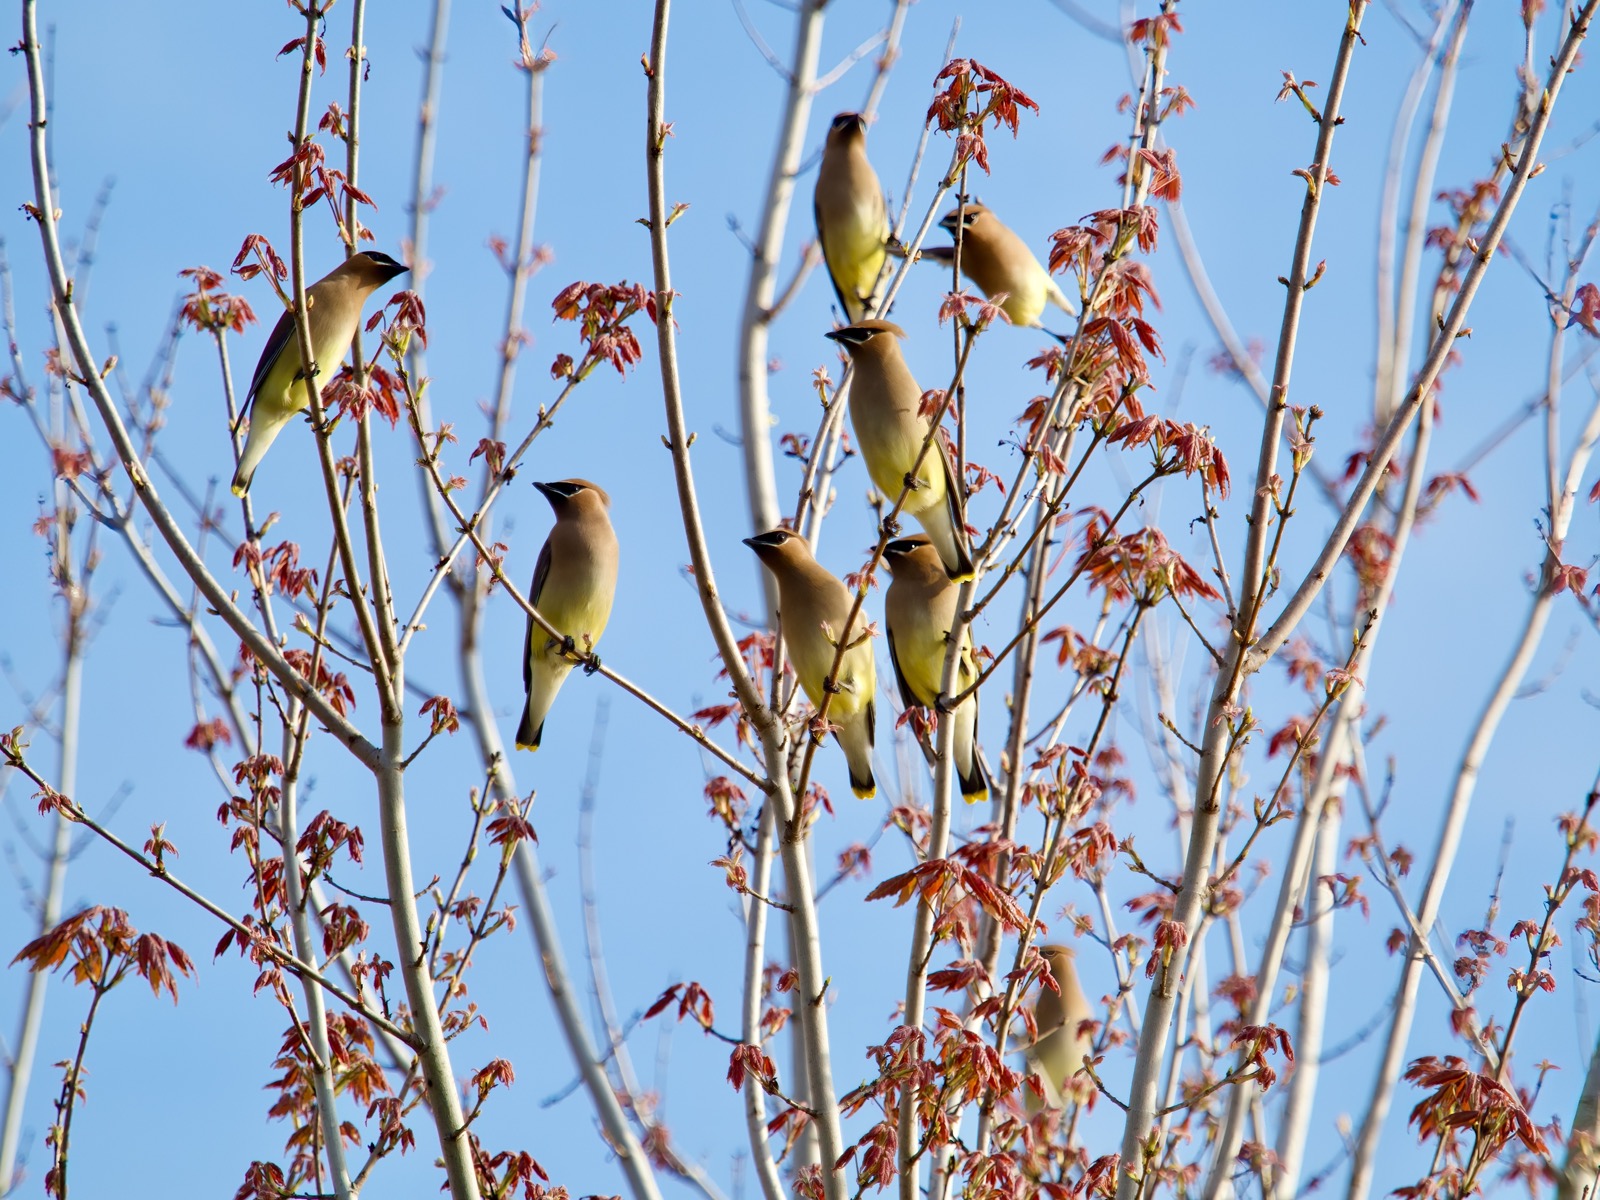 Small number of cedar waxwings perched in a tree